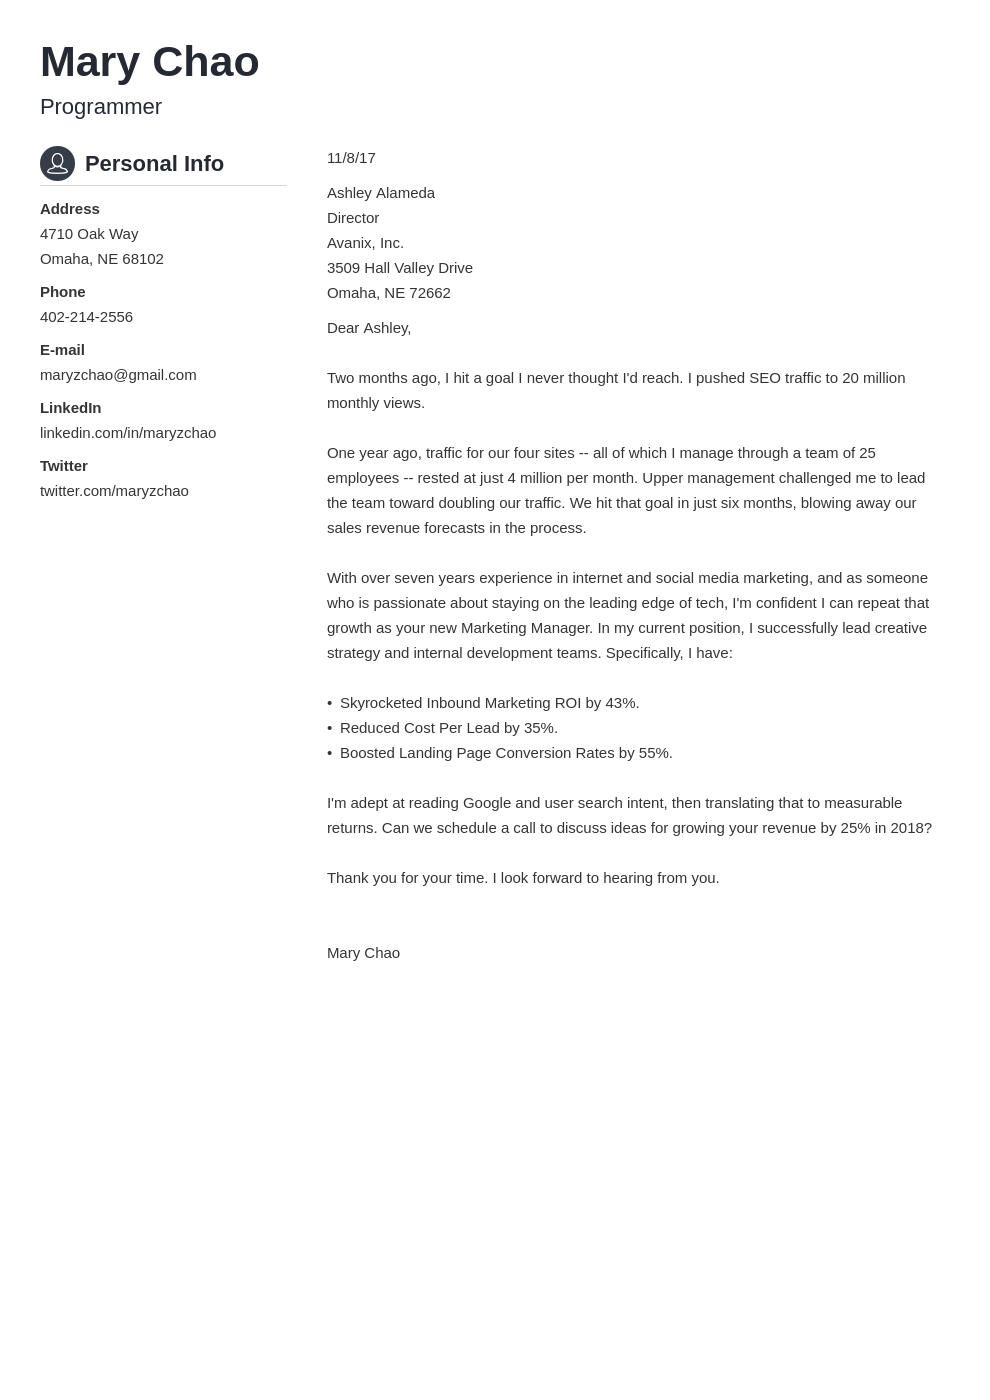 How to Format a Cover Letter in 26: 26+ Proper Examples